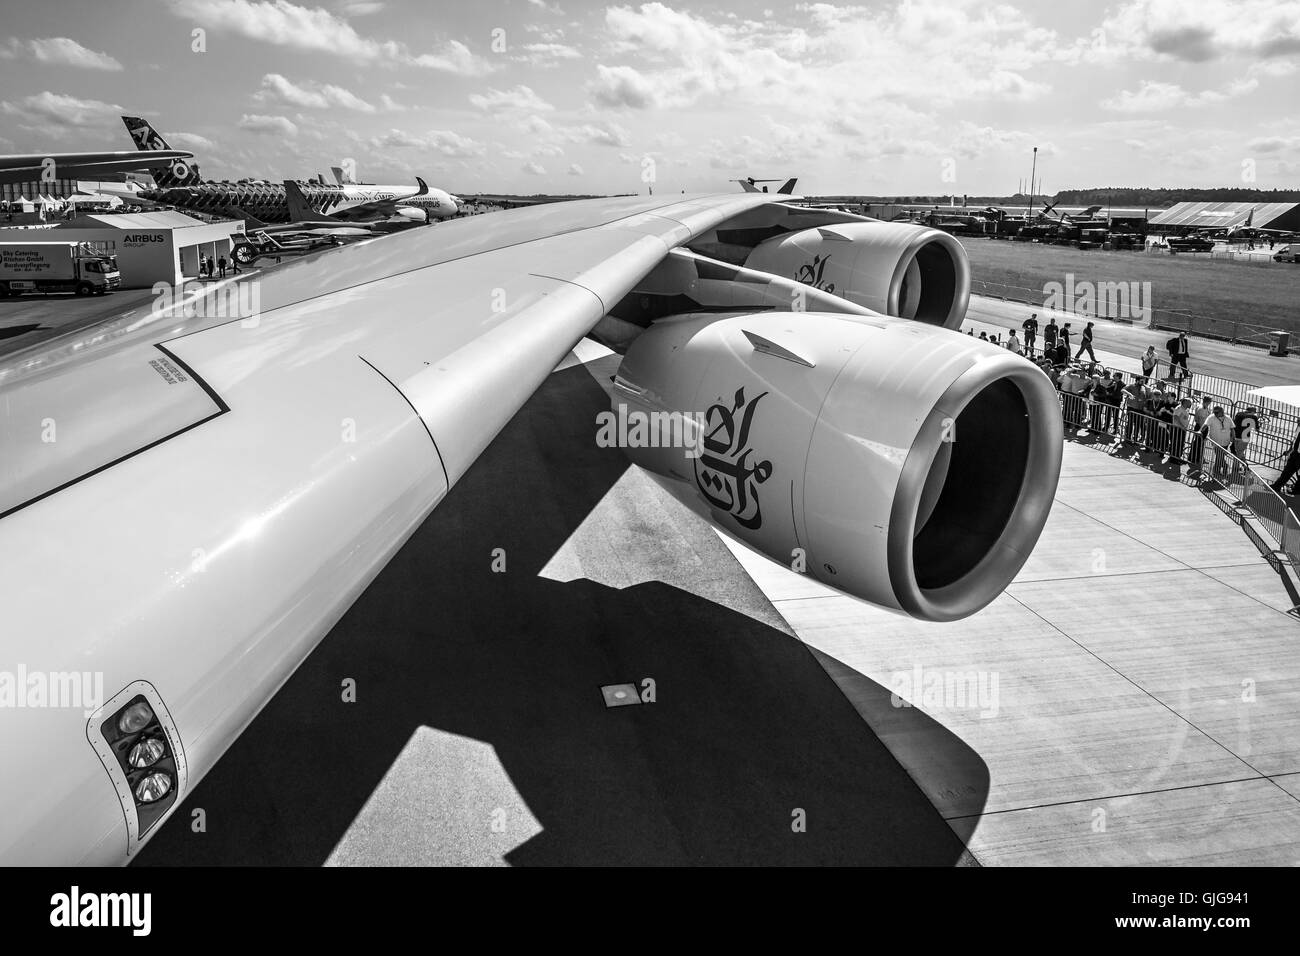 Detail of the wing and a turbofan engine 'Engine Alliance GP7000' of the largest aircraft in the world - Airbus A380. Stock Photo